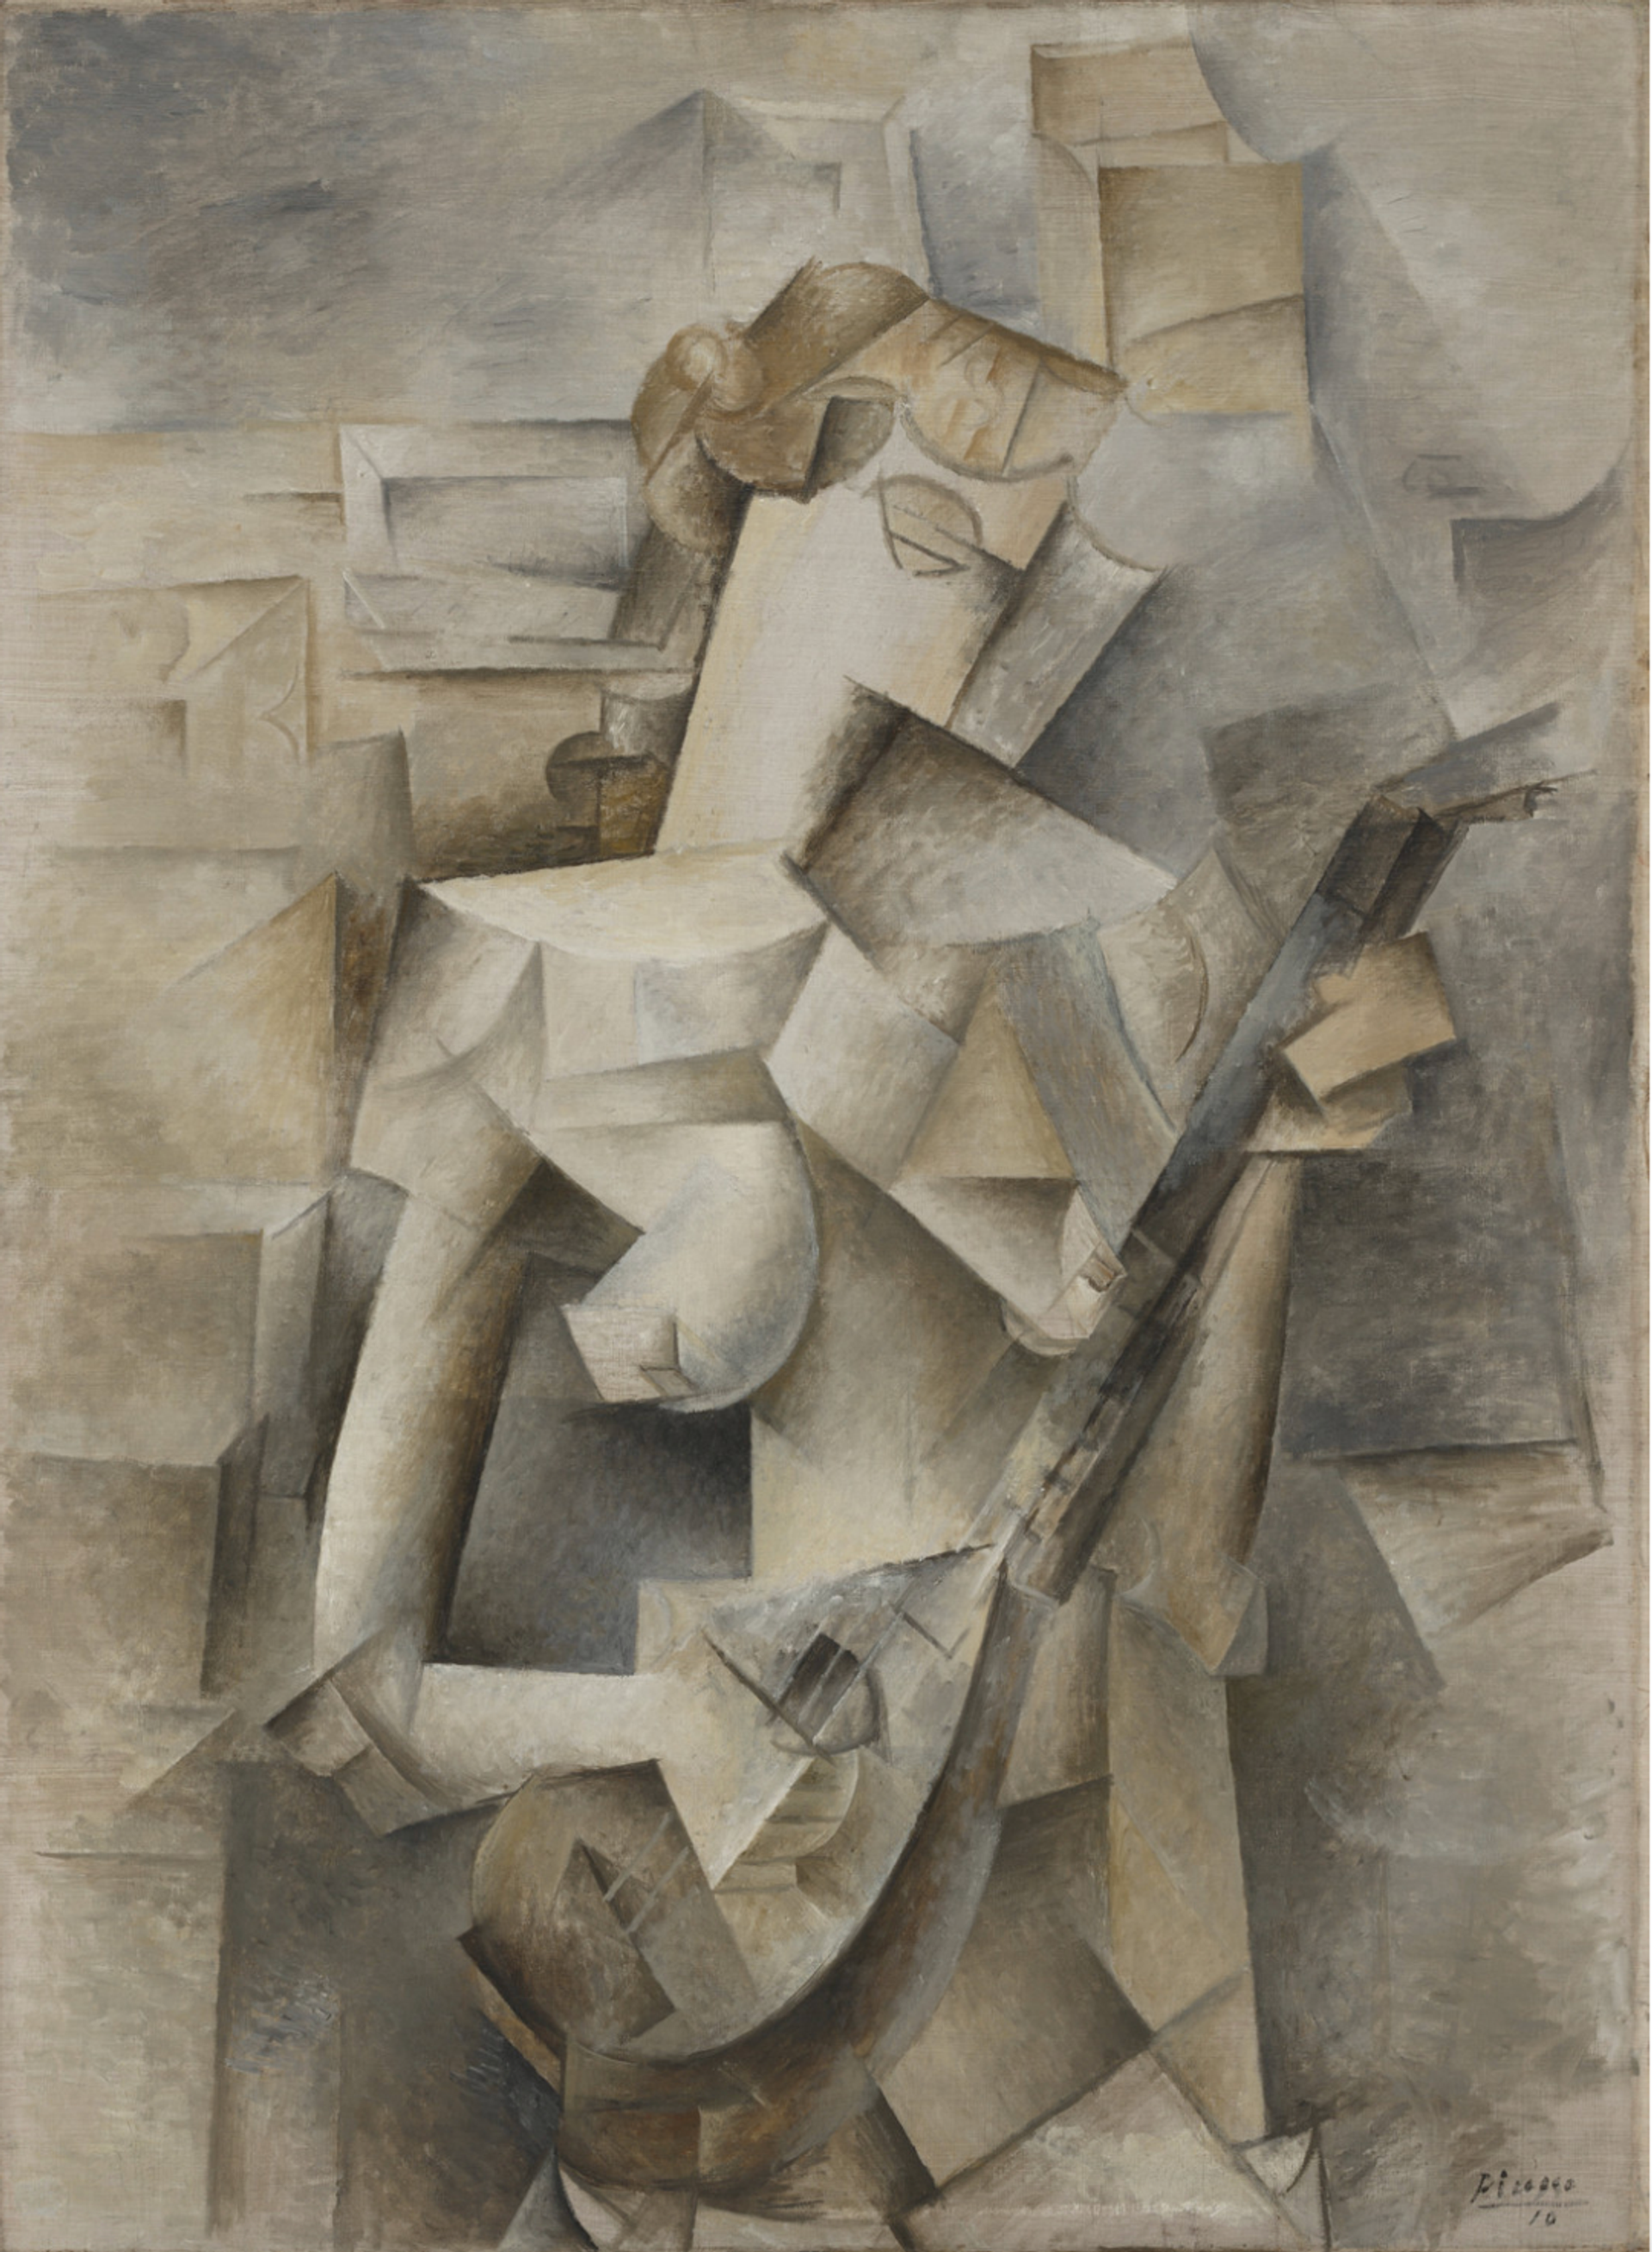 Painting by Pablo Picasso depicting a woman playing the mandolin. The figure is broken up into geometric shapes and is depicted in beige and grey tones.